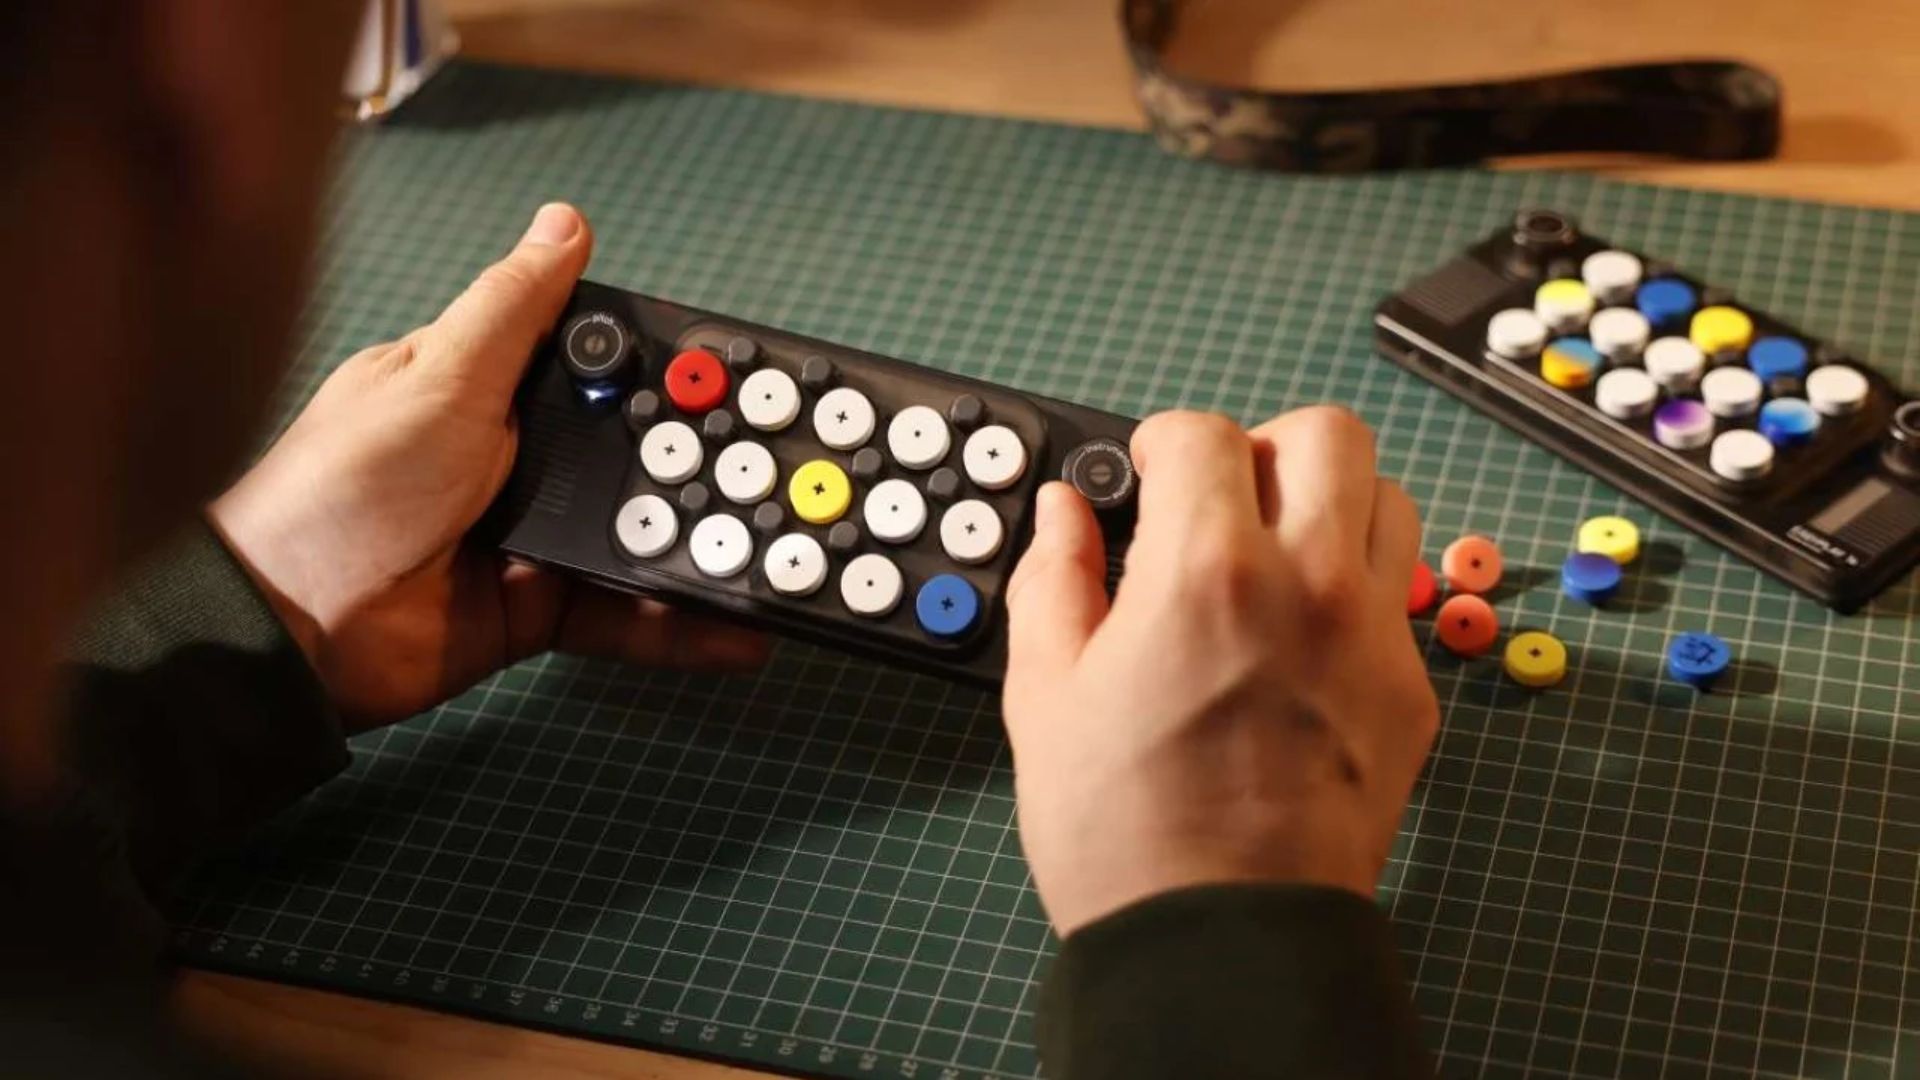 EASYPLAY 1s – An affordable compact MIDI Controller With a Twist